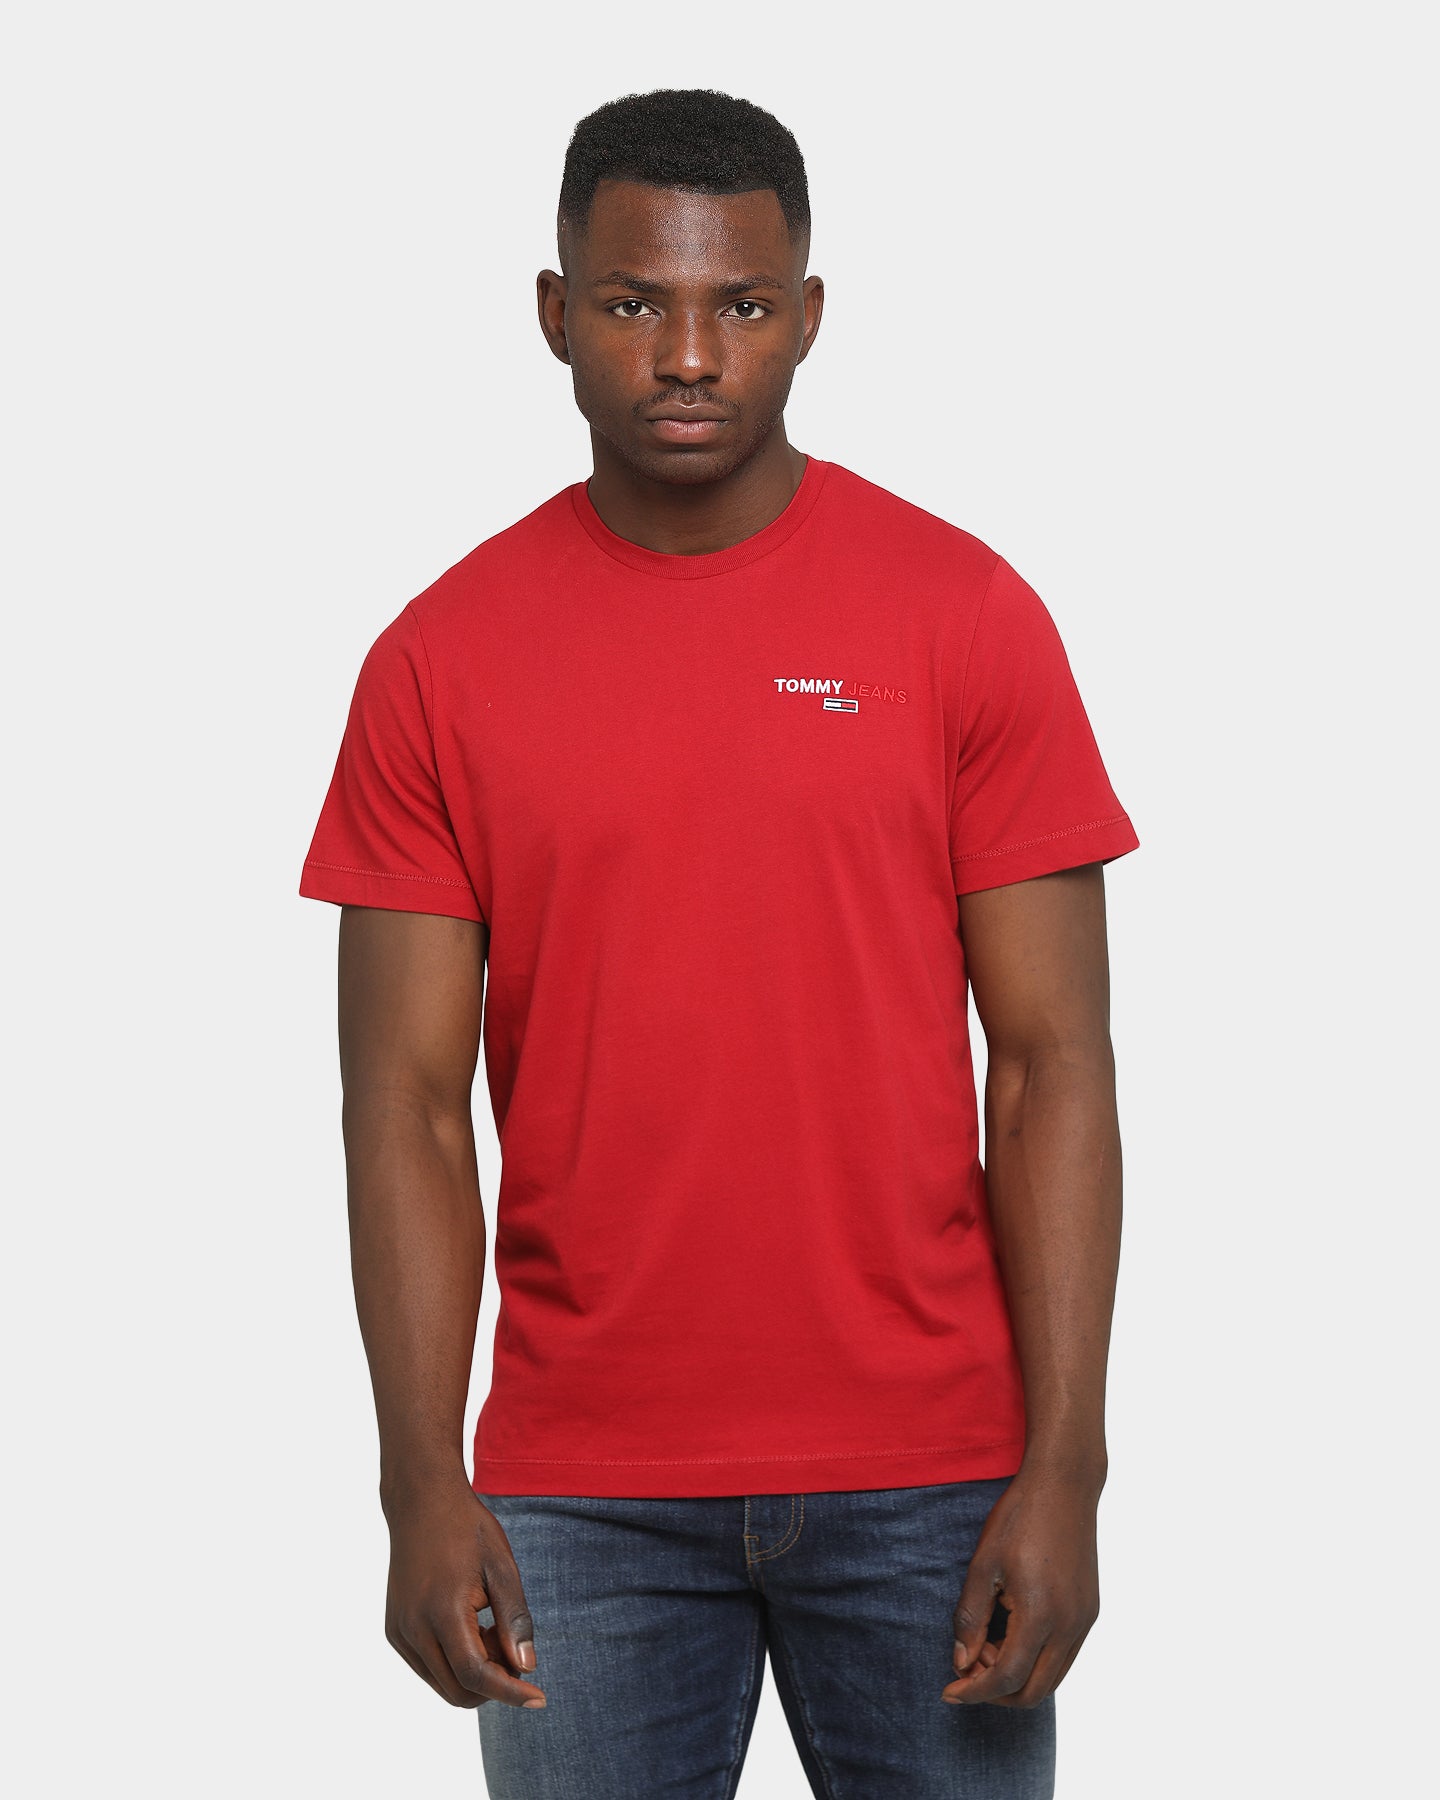 red tommy jeans t shirt